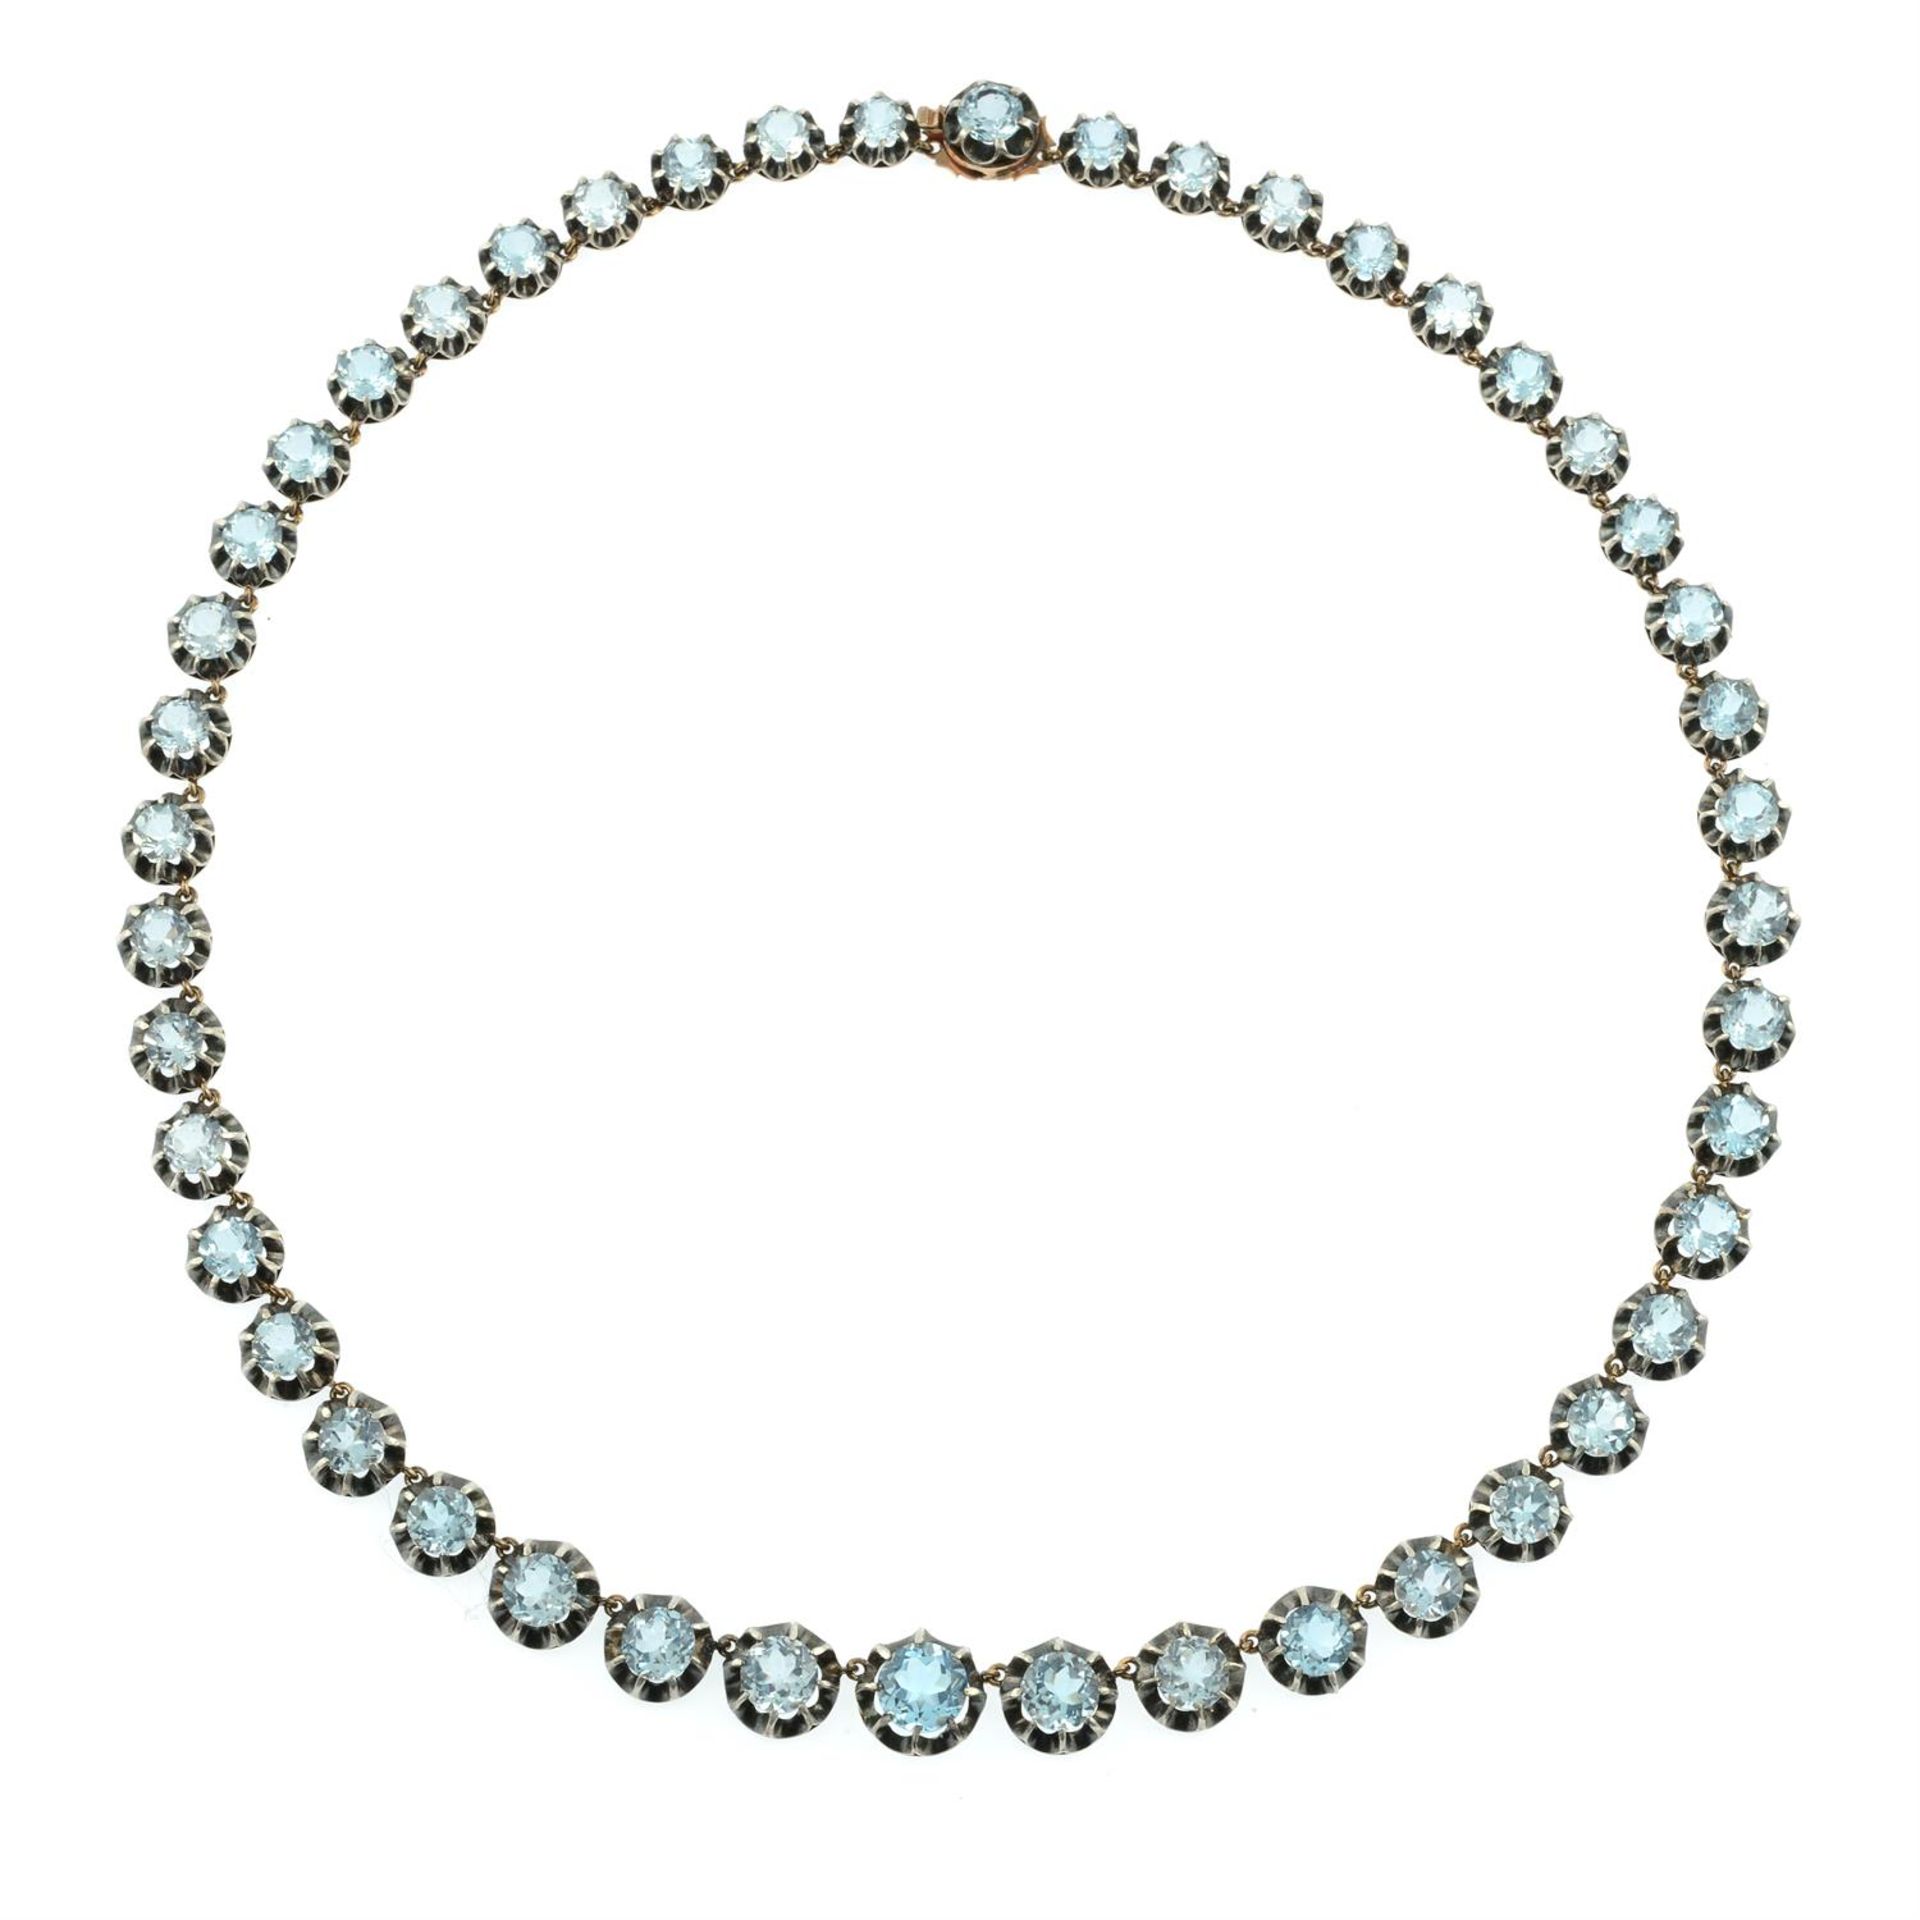 A 19th century silver and gold blue topaz rivière necklace. - Image 2 of 4